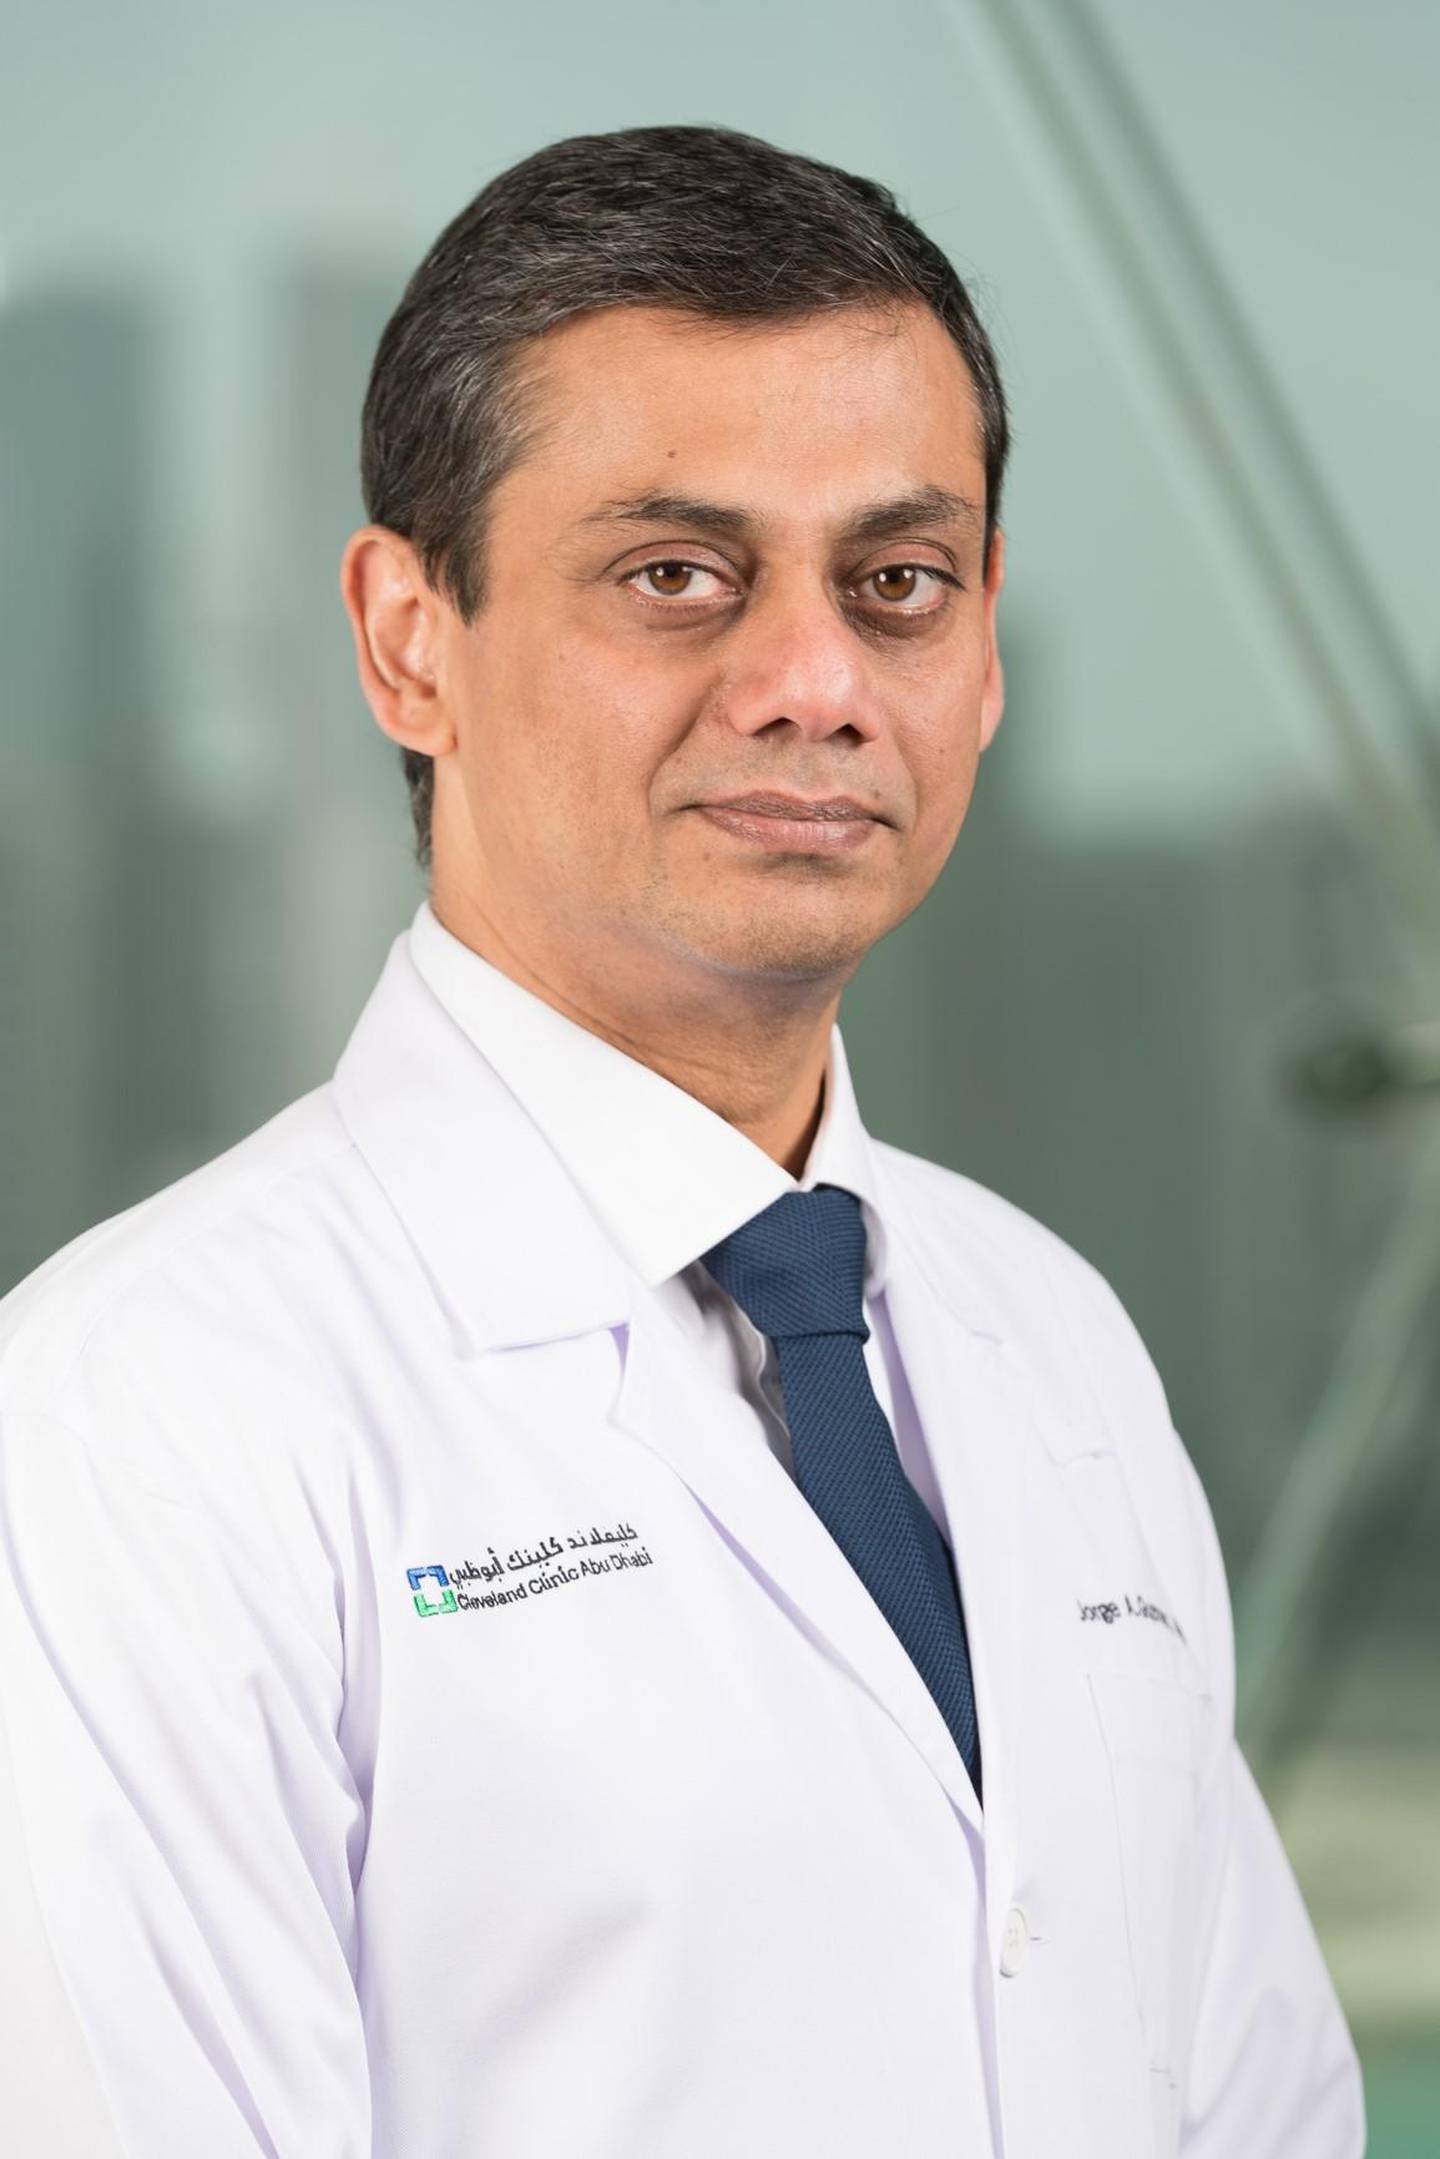 Dr Madhu Sasidhar, chief medical officer at Cleveland Clinic Abu Dhabi, believes the hospital’s new app will allow patients to access vital health services while practising physical distancing. CCAD